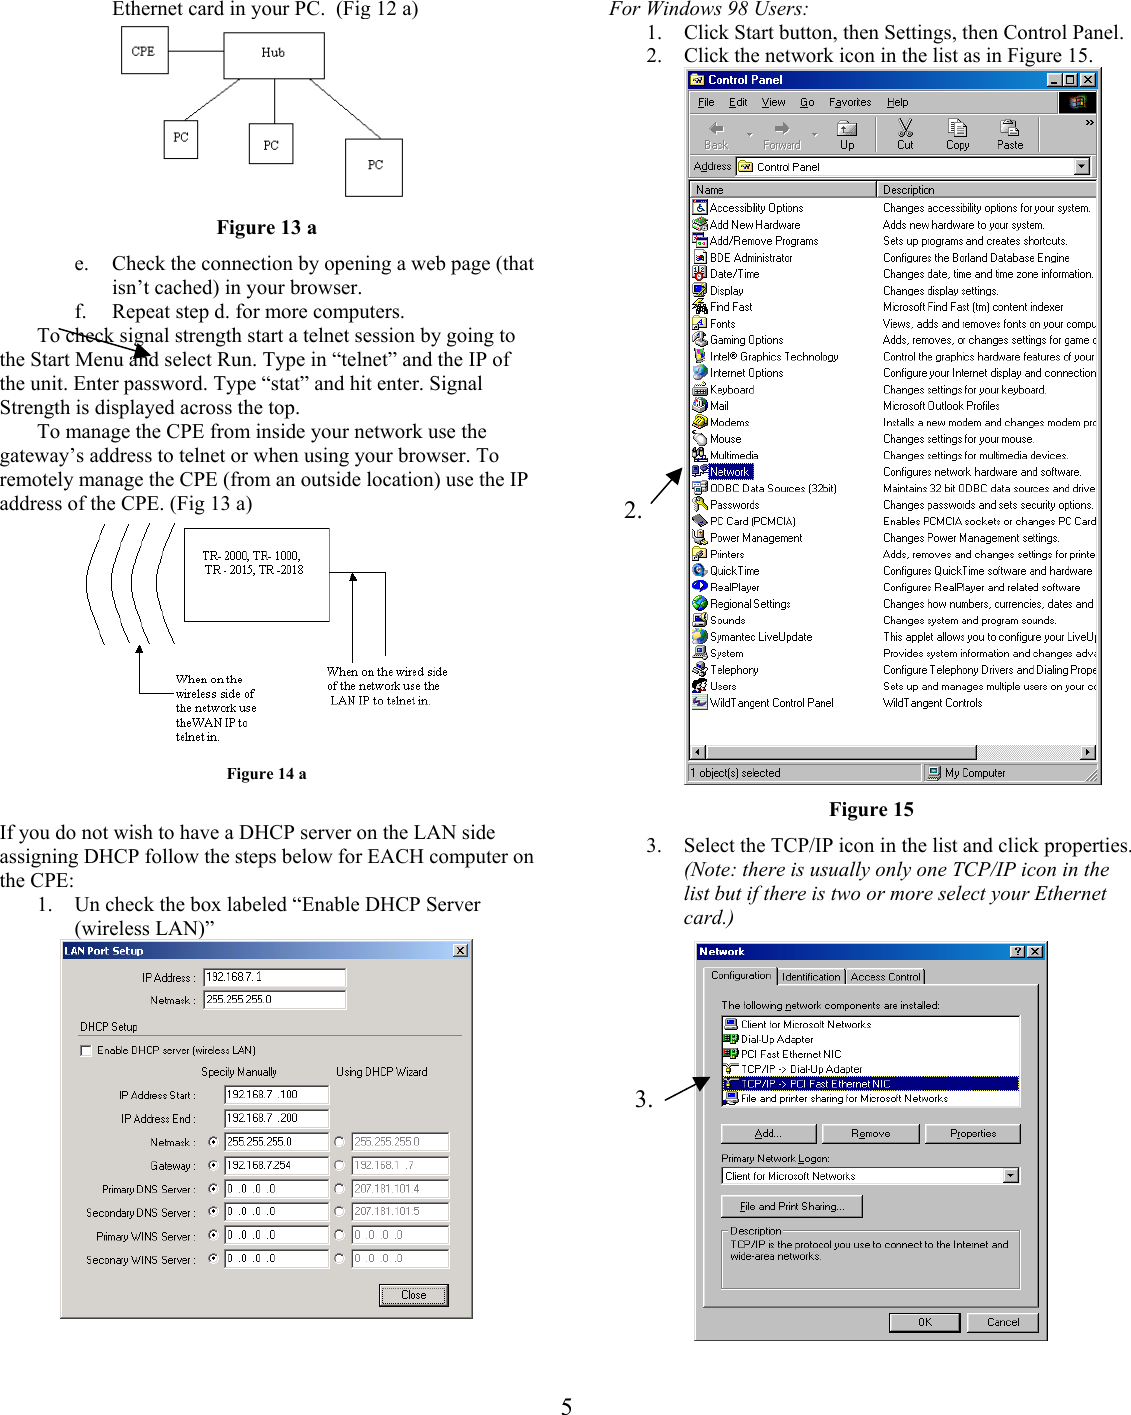 For Windows 98 Users: Ethernet card in your PC.  (Fig 12 a)            1.  Click Start button, then Settings, then Control Panel. 2.  Click the network icon in the list as in Figure 15.  Figure 13 a e.  Check the connection by opening a web page (that isn’t cached) in your browser. f.  Repeat step d. for more computers.   To check signal strength start a telnet session by going to the Start Menu and select Run. Type in “telnet” and the IP of the unit. Enter password. Type “stat” and hit enter. Signal Strength is displayed across the top. To manage the CPE from inside your network use the gateway’s address to telnet or when using your browser. To remotely manage the CPE (from an outside location) use the IP address of the CPE. (Fig 13 a)  2.3.  Figure 14 a  Figure 15 If you do not wish to have a DHCP server on the LAN side assigning DHCP follow the steps below for EACH computer on the CPE:  3.  Select the TCP/IP icon in the list and click properties. (Note: there is usually only one TCP/IP icon in the list but if there is two or more select your Ethernet card.)  1.  Un check the box labeled “Enable DHCP Server (wireless LAN)”    5